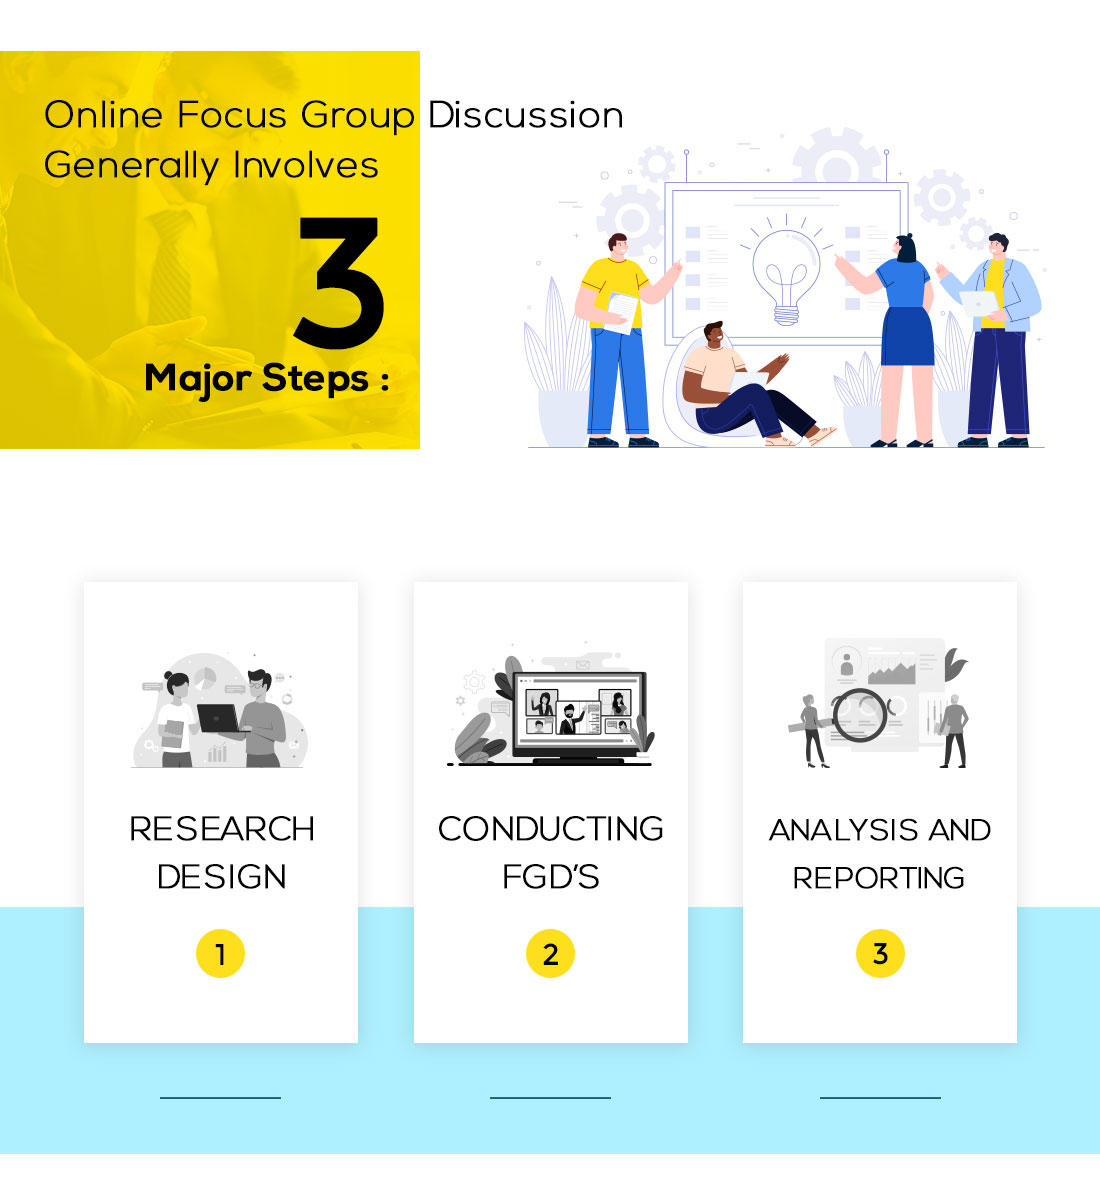 How To Conduct Online Focus Group Discussion?